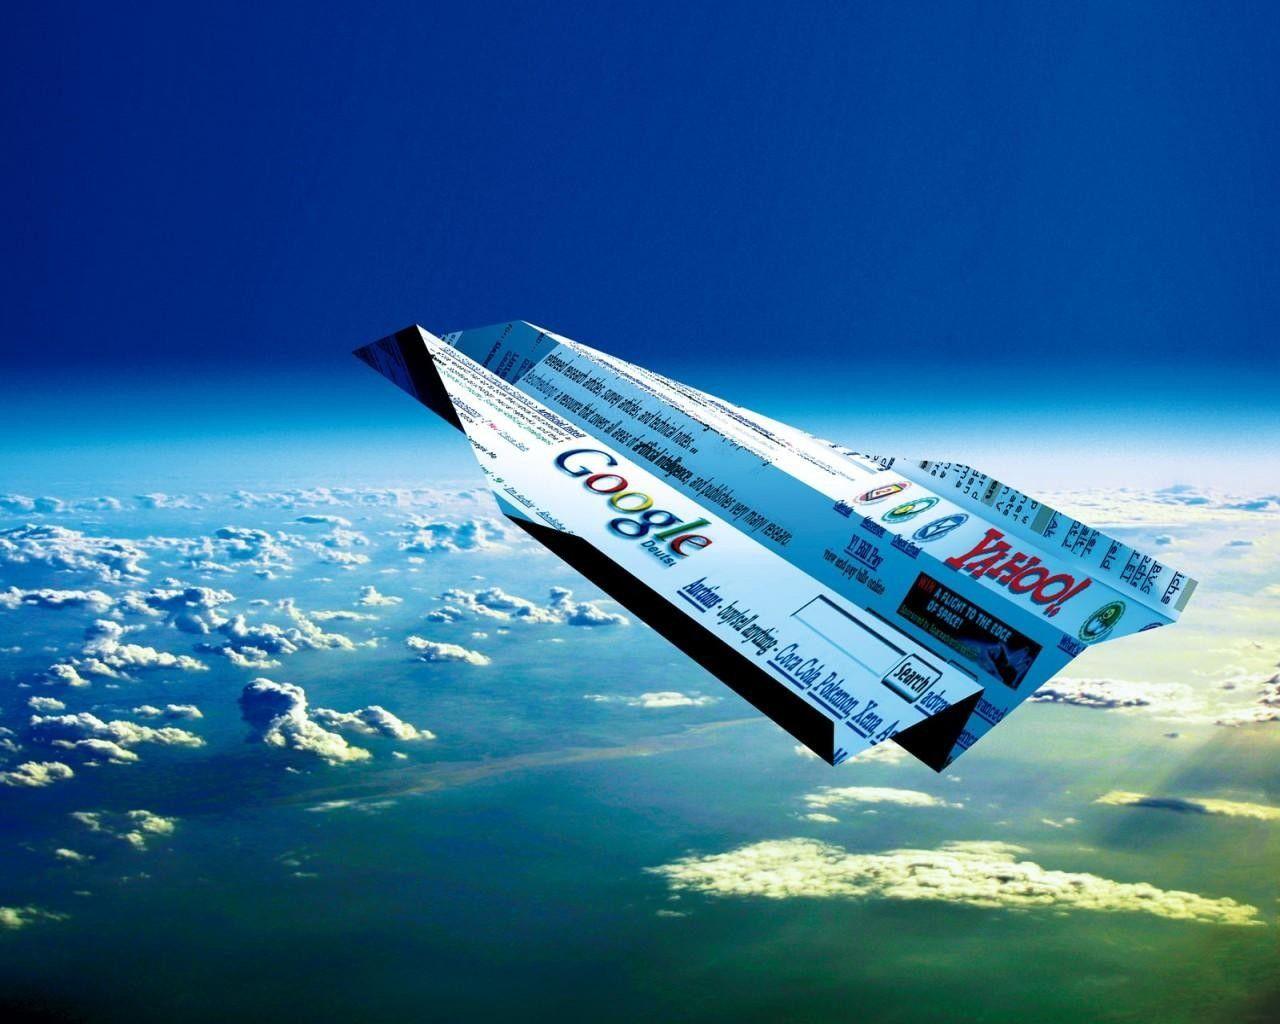 Paper airplane with Google wallpaper and image